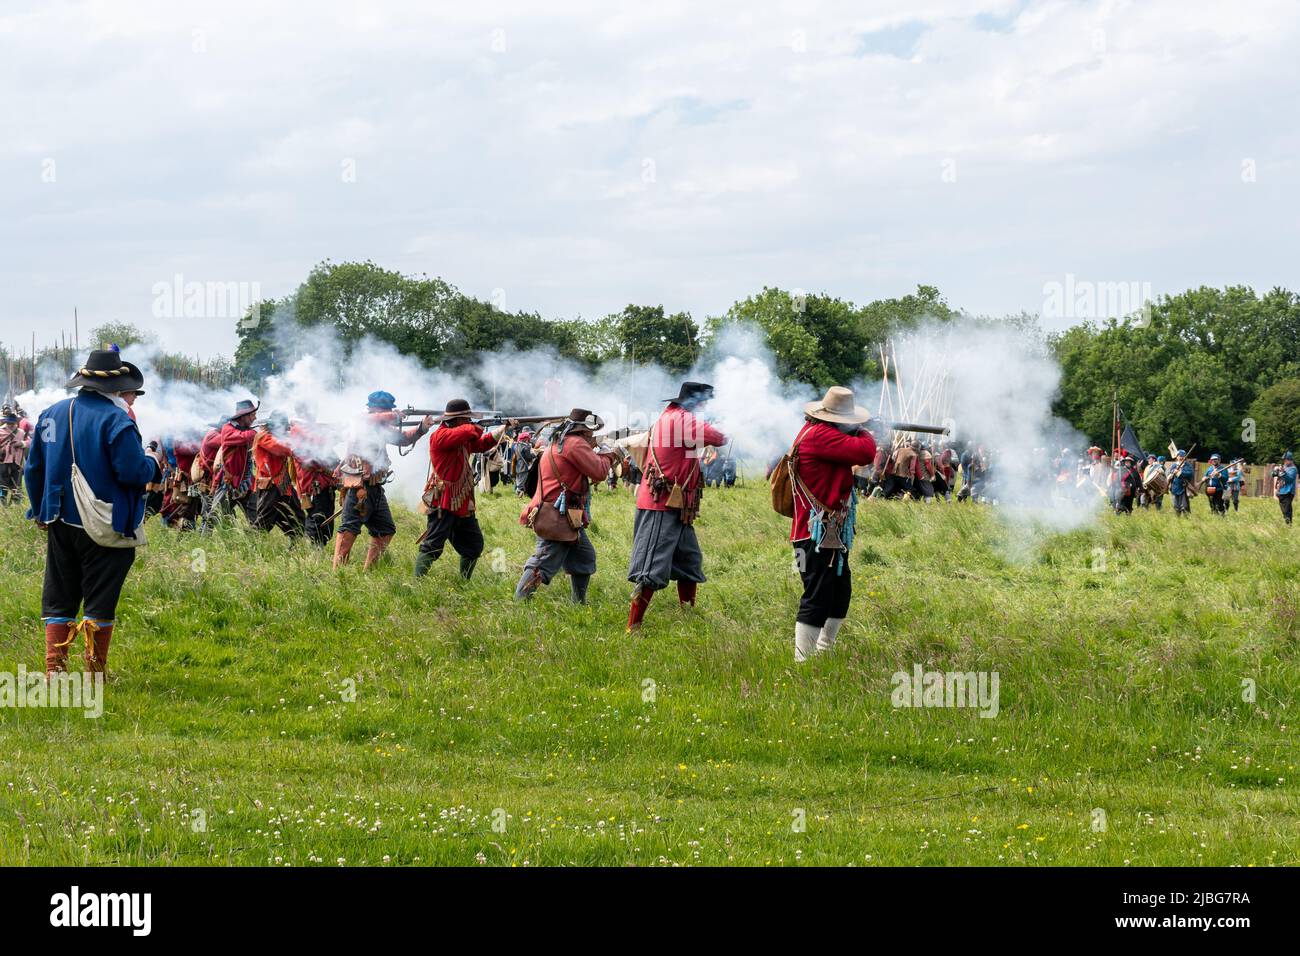 The Sealed Knot performing an English civil war re-enactment of the Basing House Siege for the Queen's Platinum Jubilee, June 2022, Hampshire, UK Stock Photo